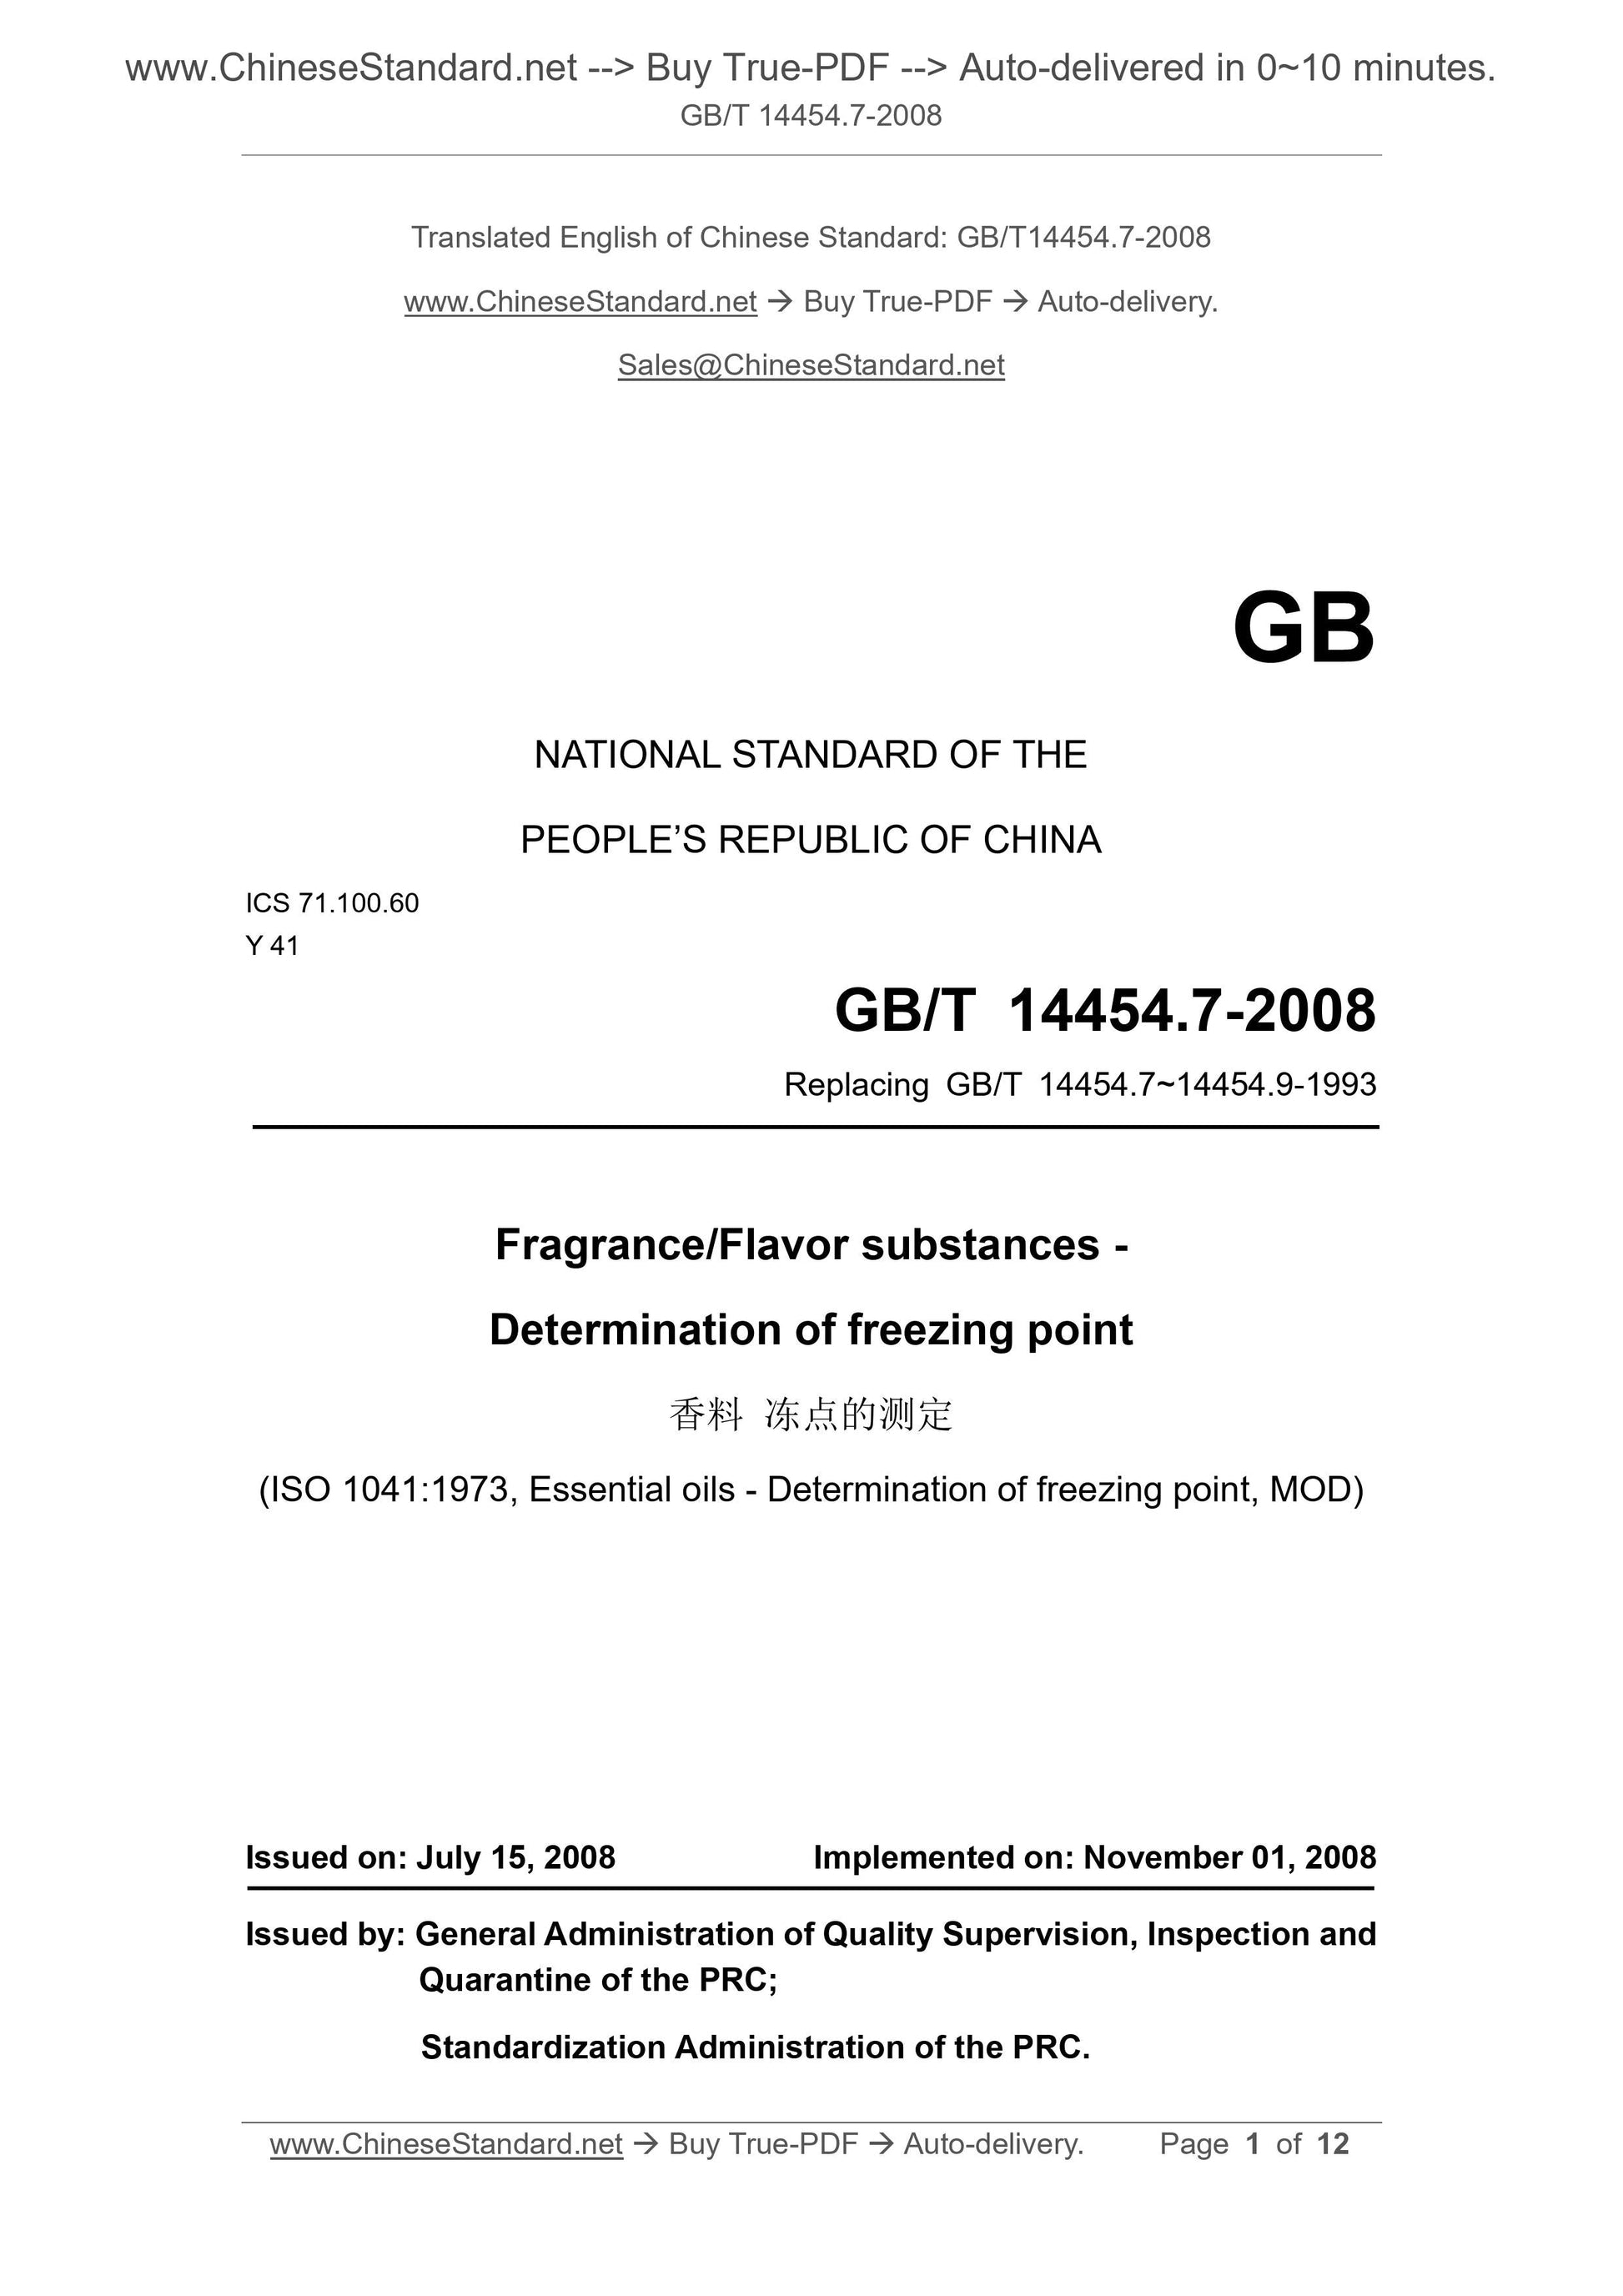 GB/T 14454.7-2008 Page 1